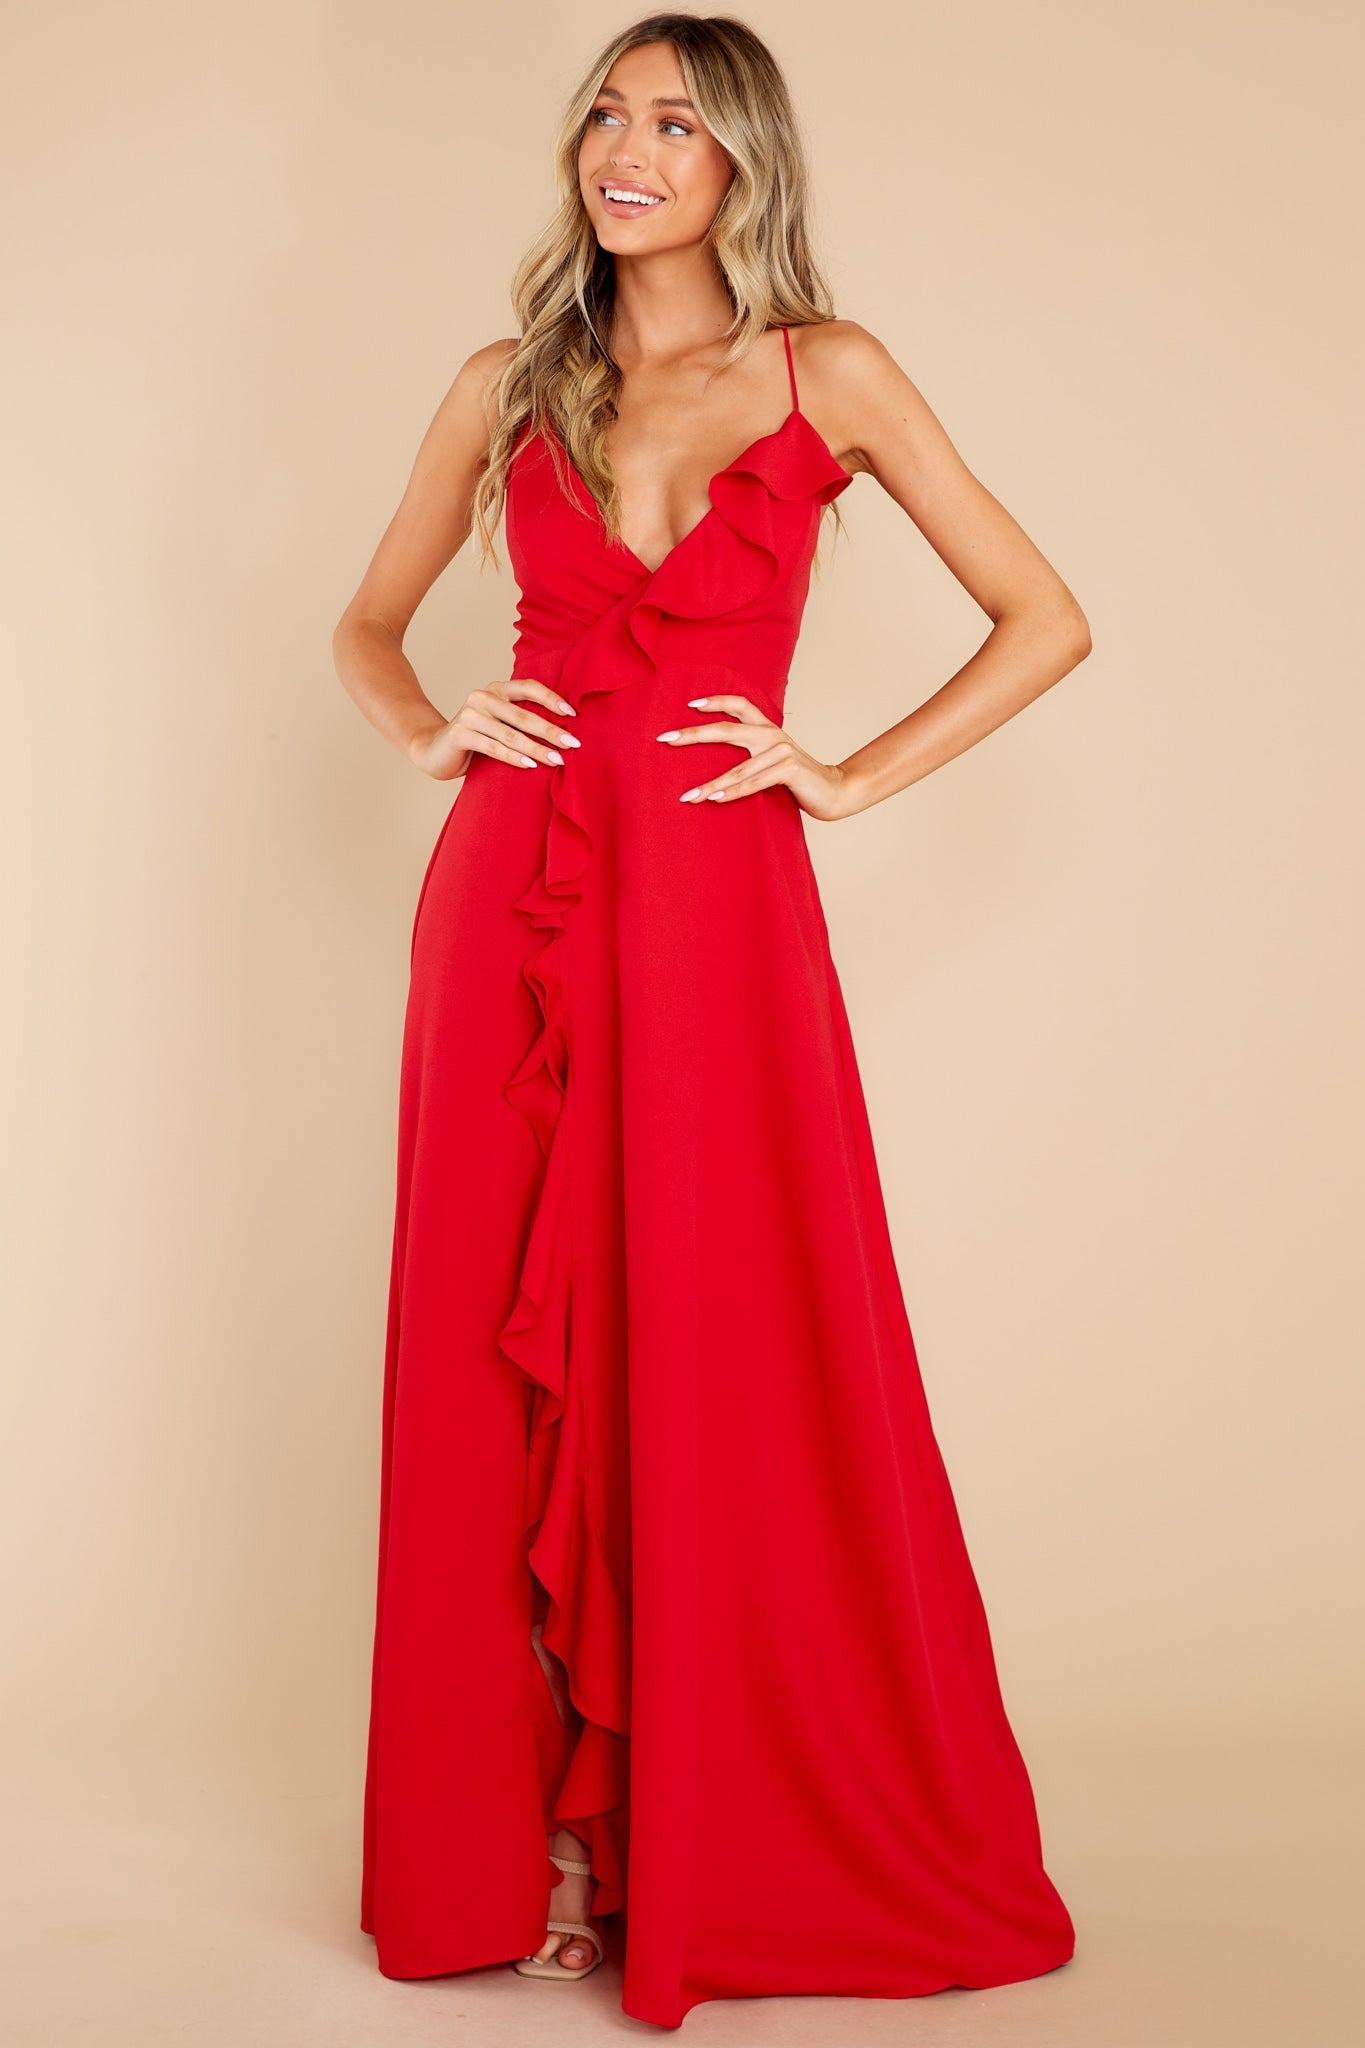 More To Come Red Maxi Dress - Red Dress